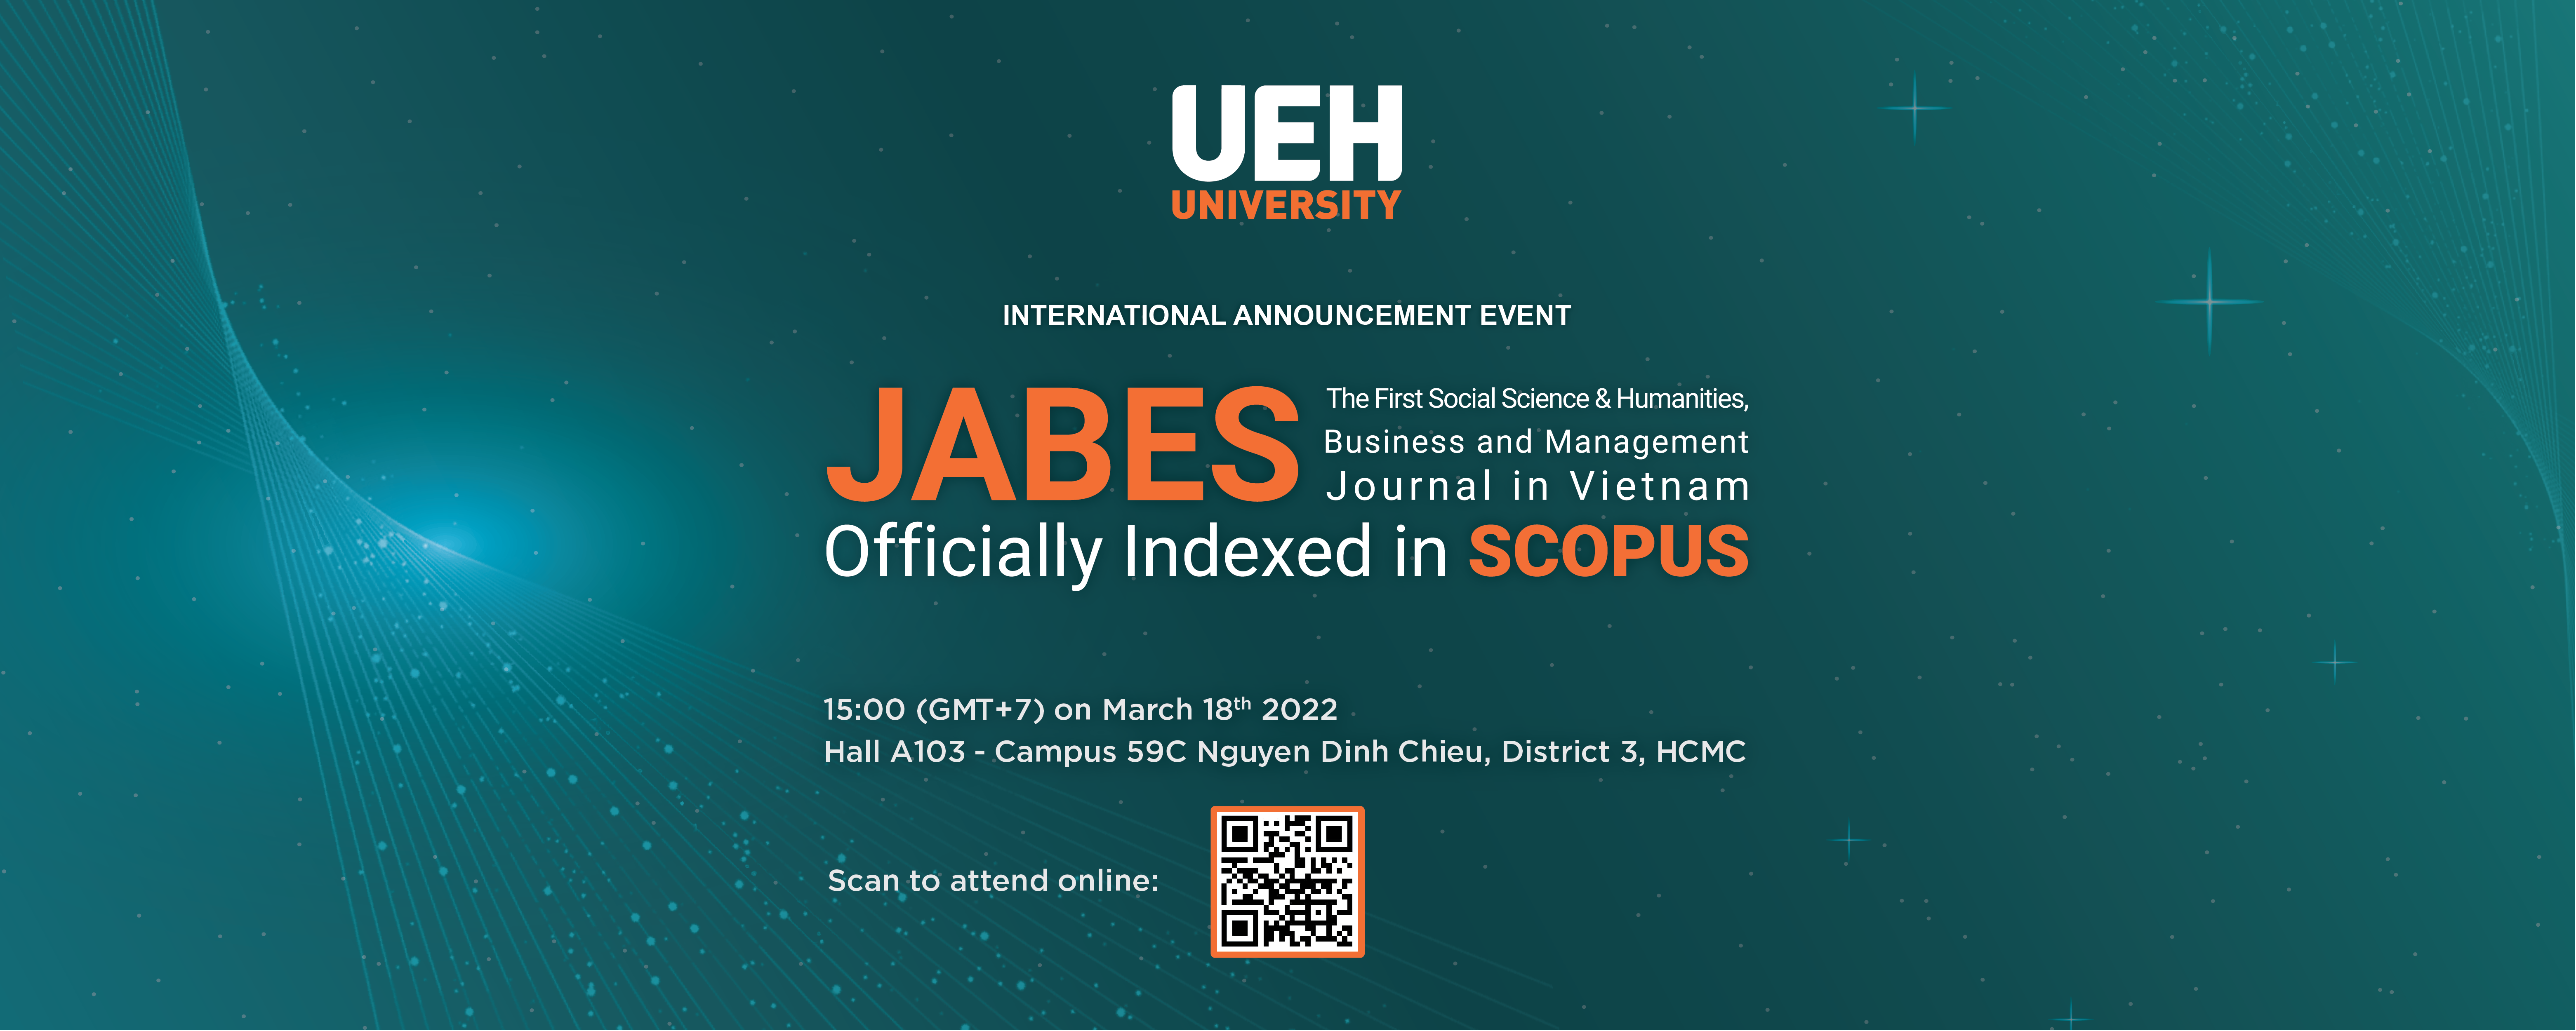 International announcement event: “JABES - The First Social Science & Humanities, Business and Management Journal in Vietnam officially indexed in SCOPUS”

